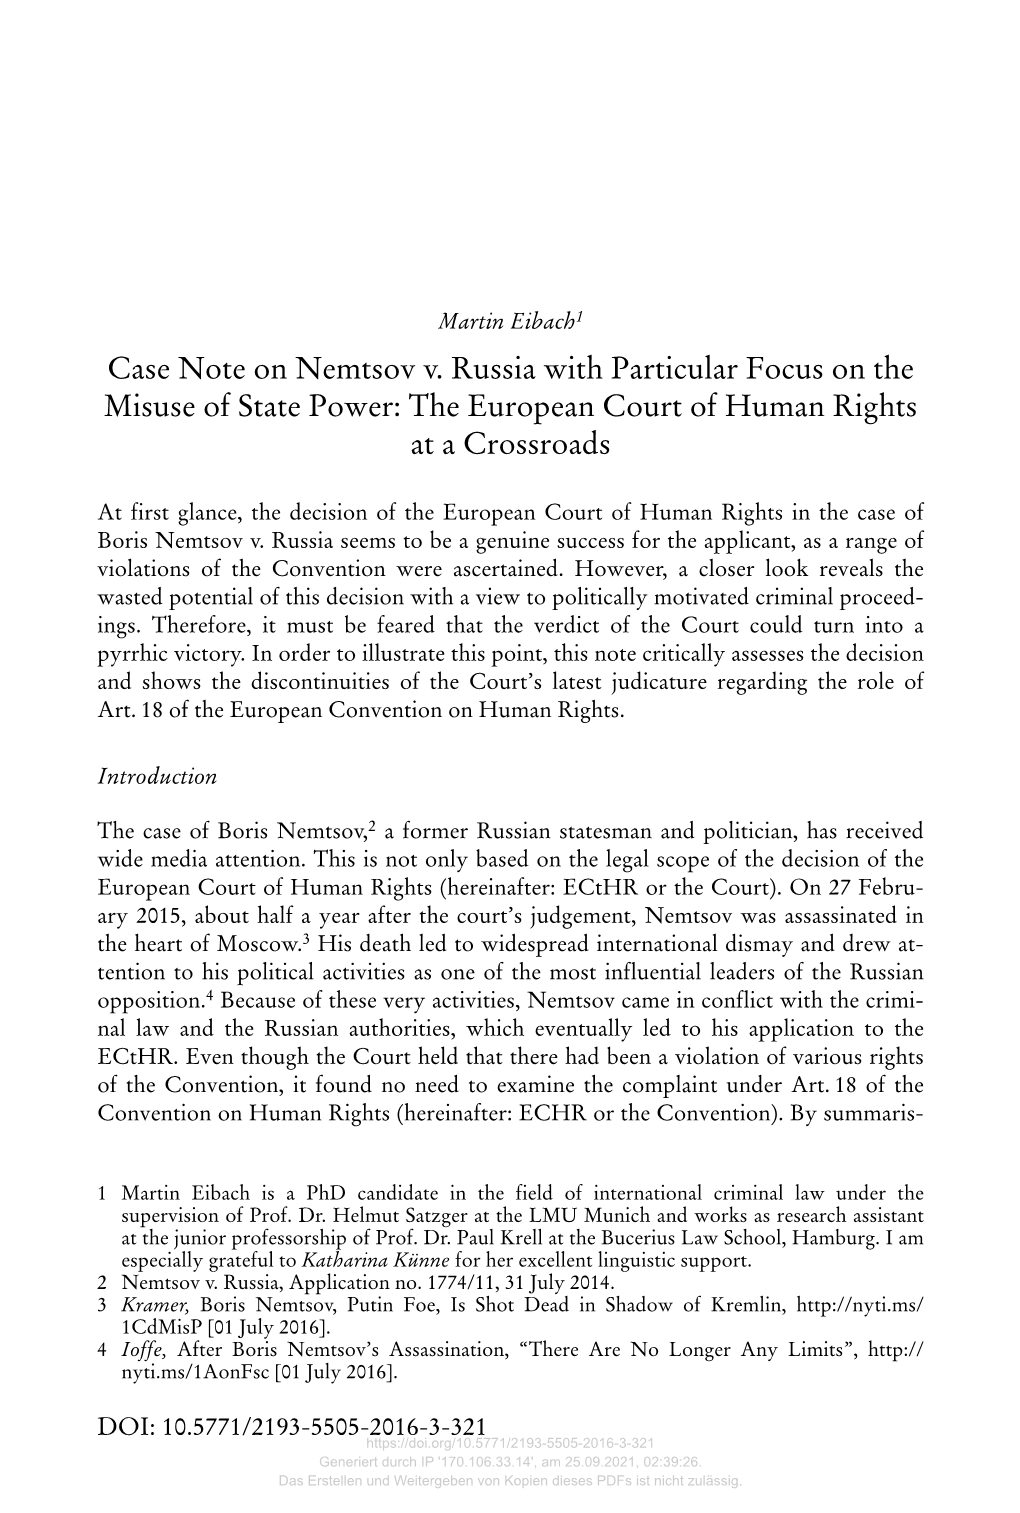 The European Court of Human Rights at a Crossroads